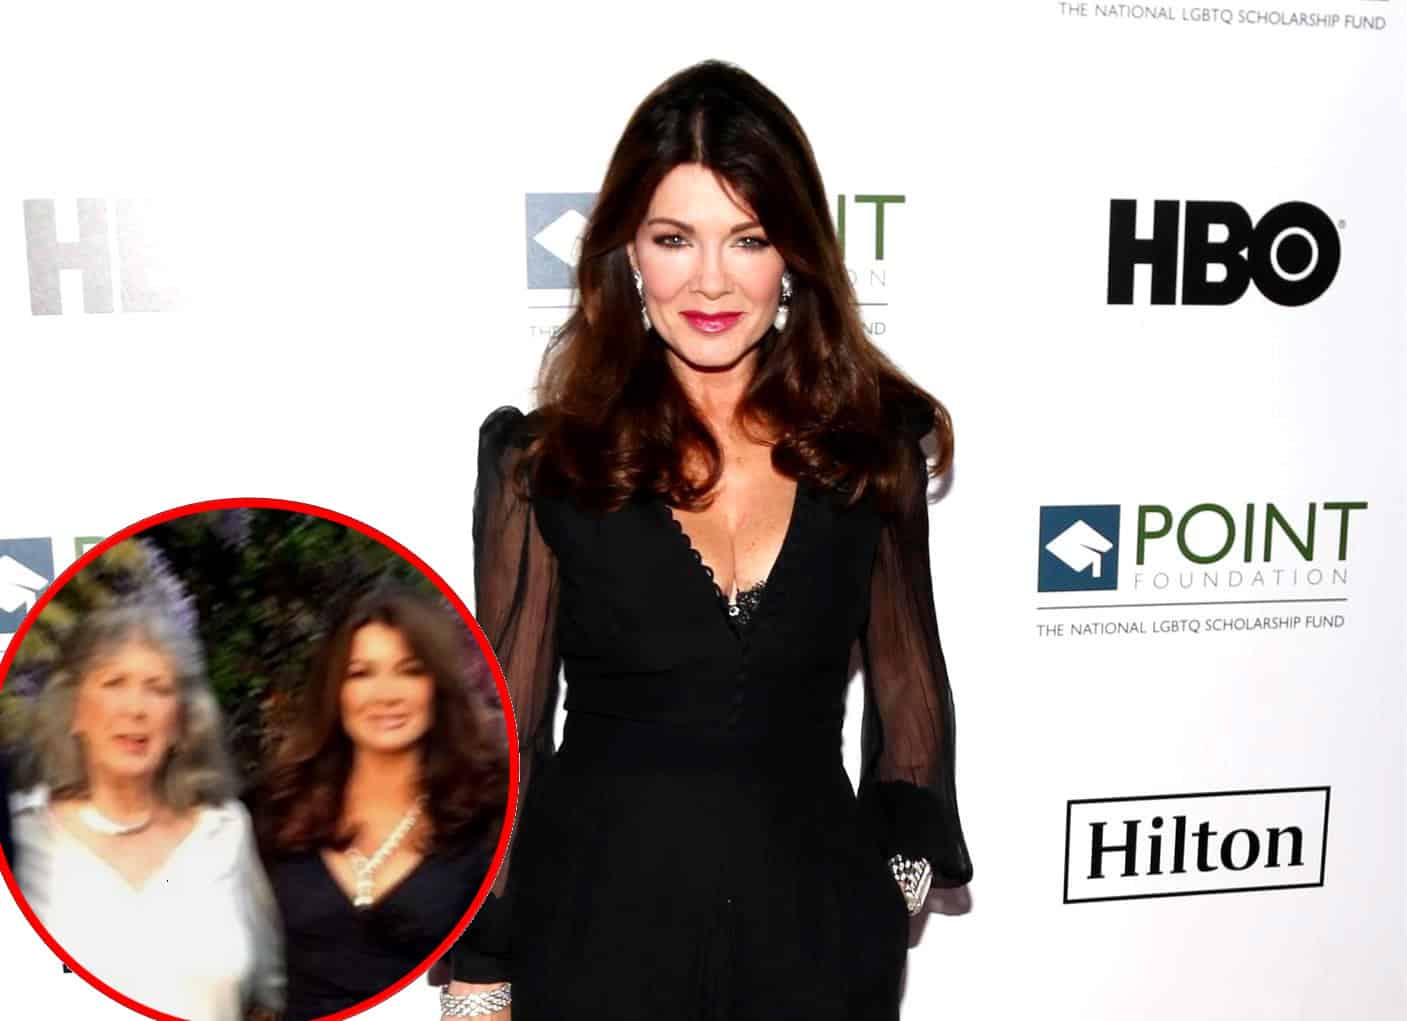 RHOBH Star Lisa Vanderpump Speaks Out After Mother's Death, Says She Has 'No Time For Negativity'